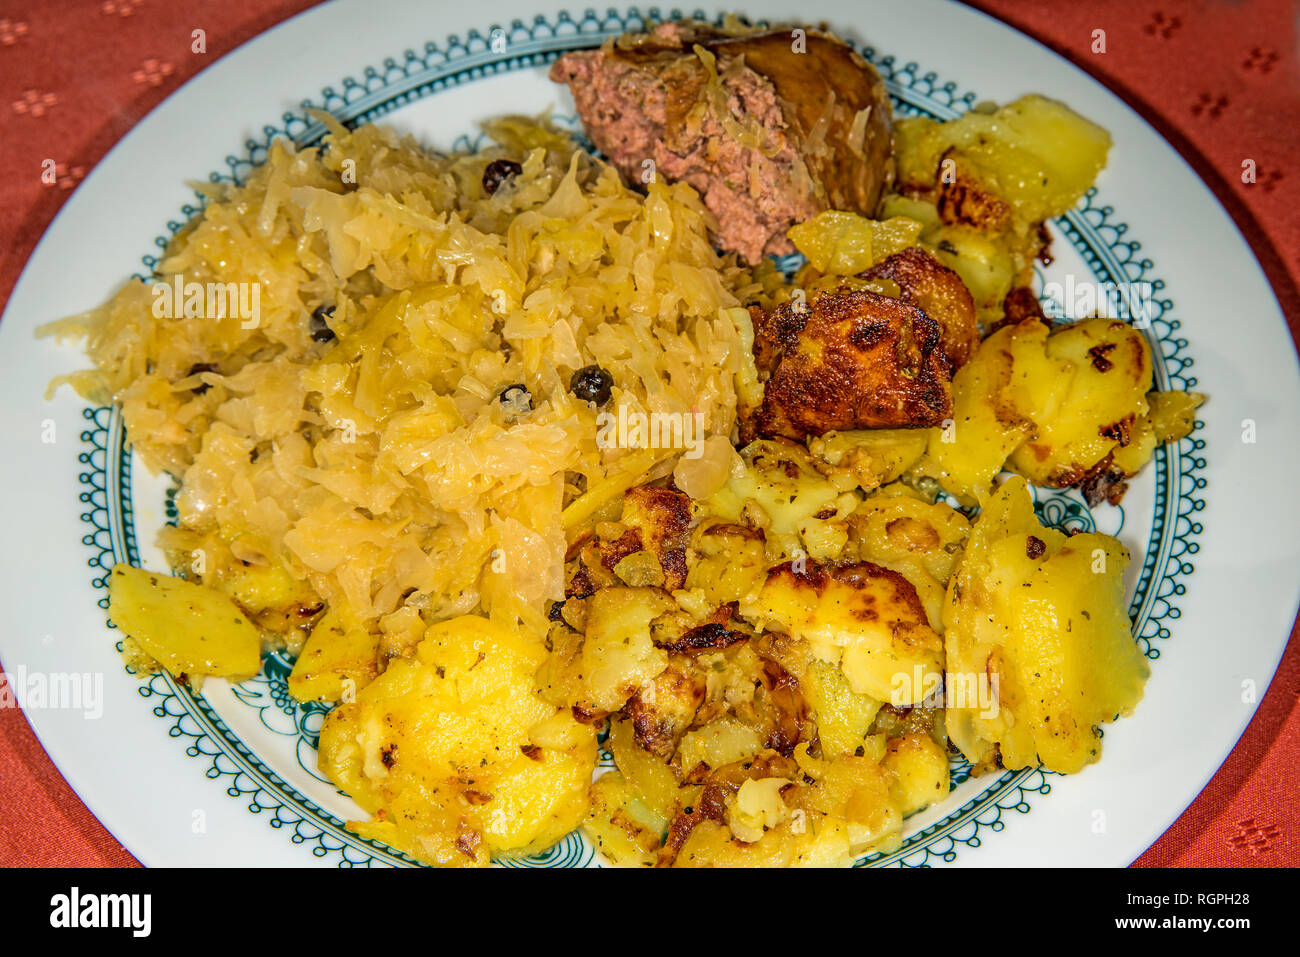 German deli Sauerkraut with liver sausage and roasted potatoes Stock Photo